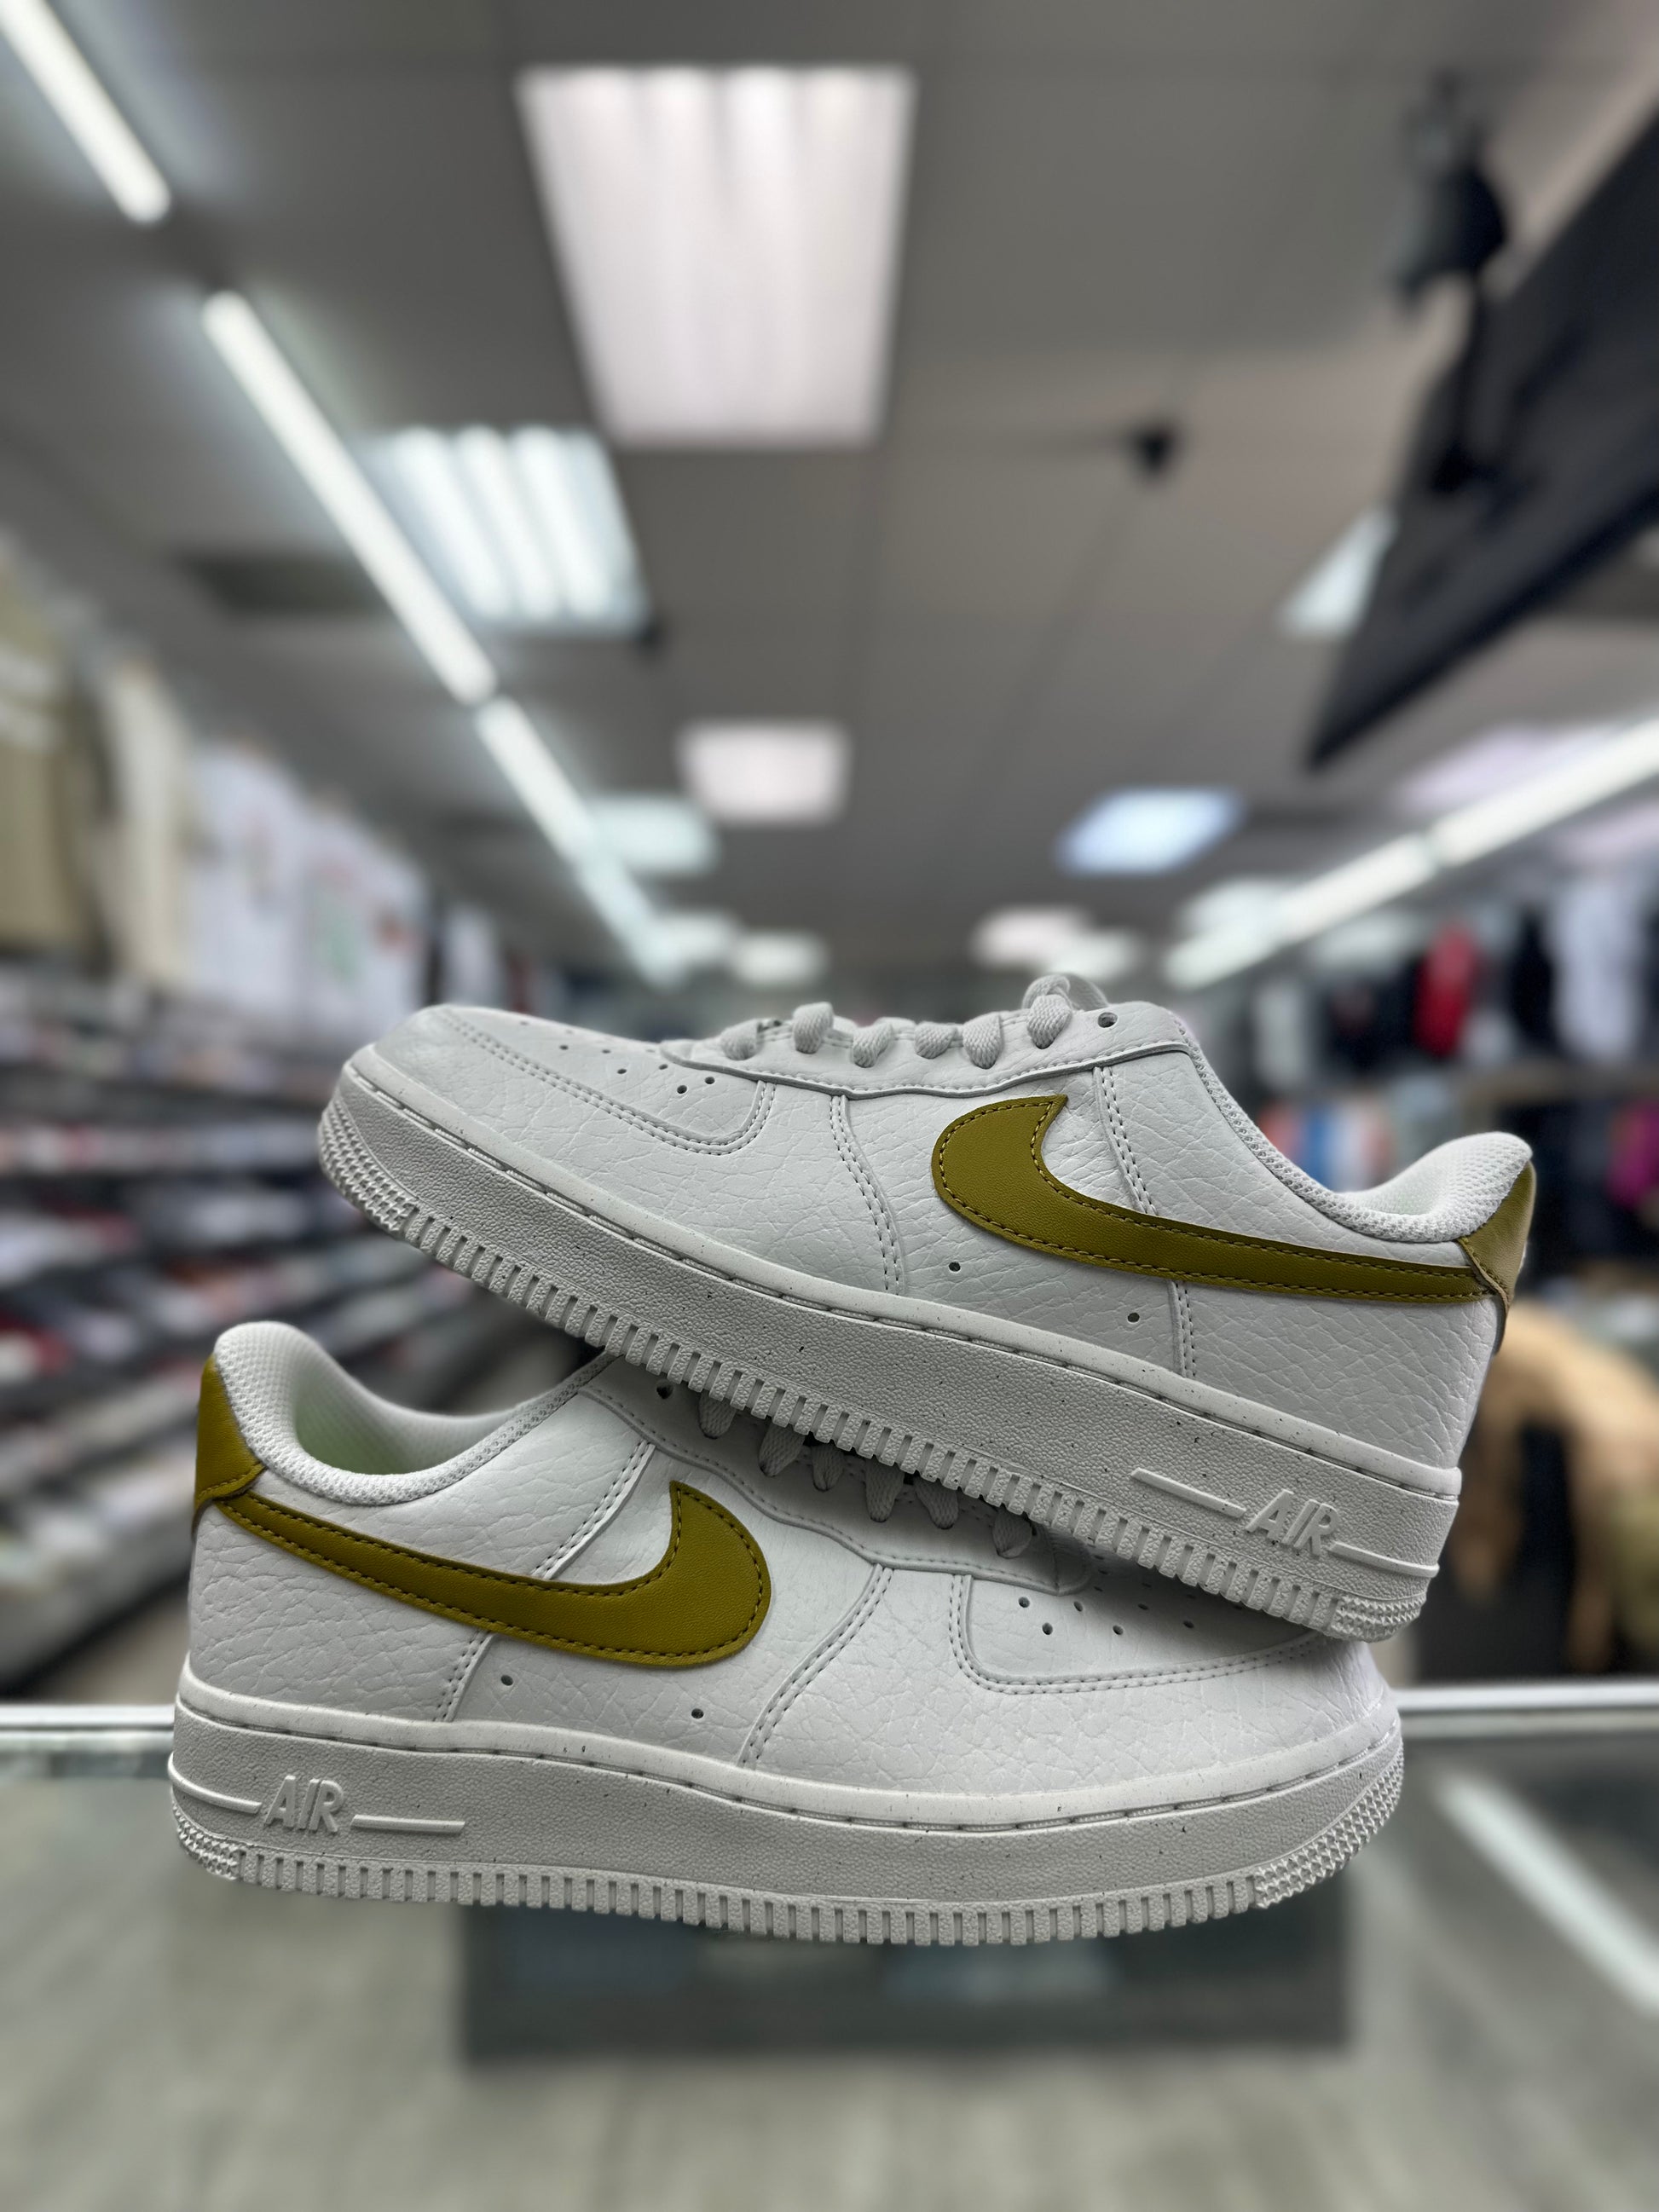 Nike Air Force One Custom Gold LV Size 10.5 for Sale in Los